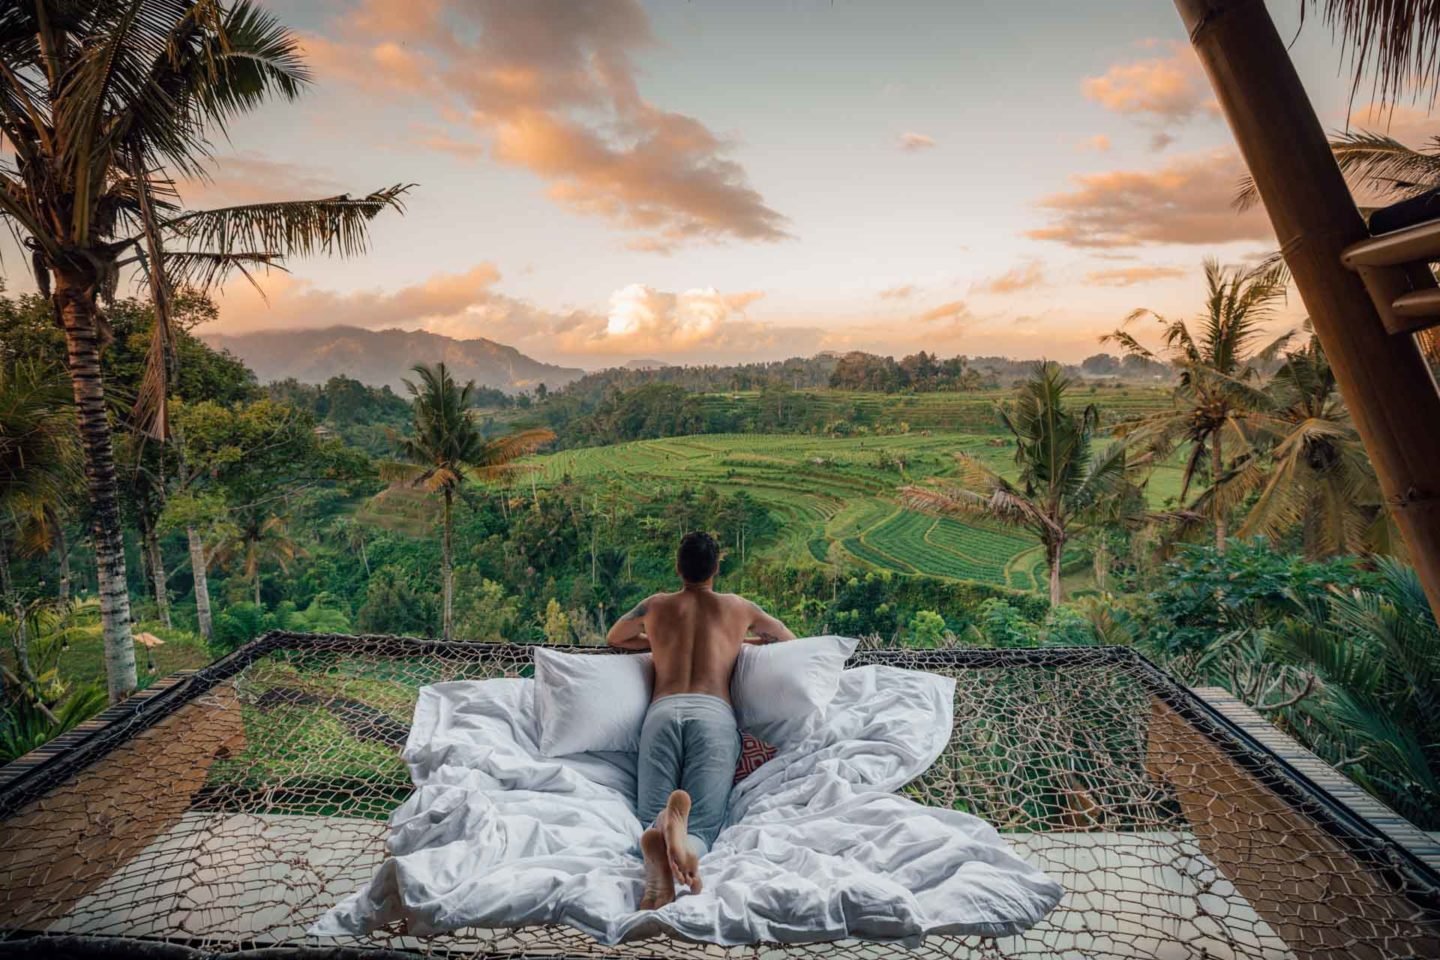 Wellness Retreats In Bali - Rejuvenate Your Mind, Body, And Soul